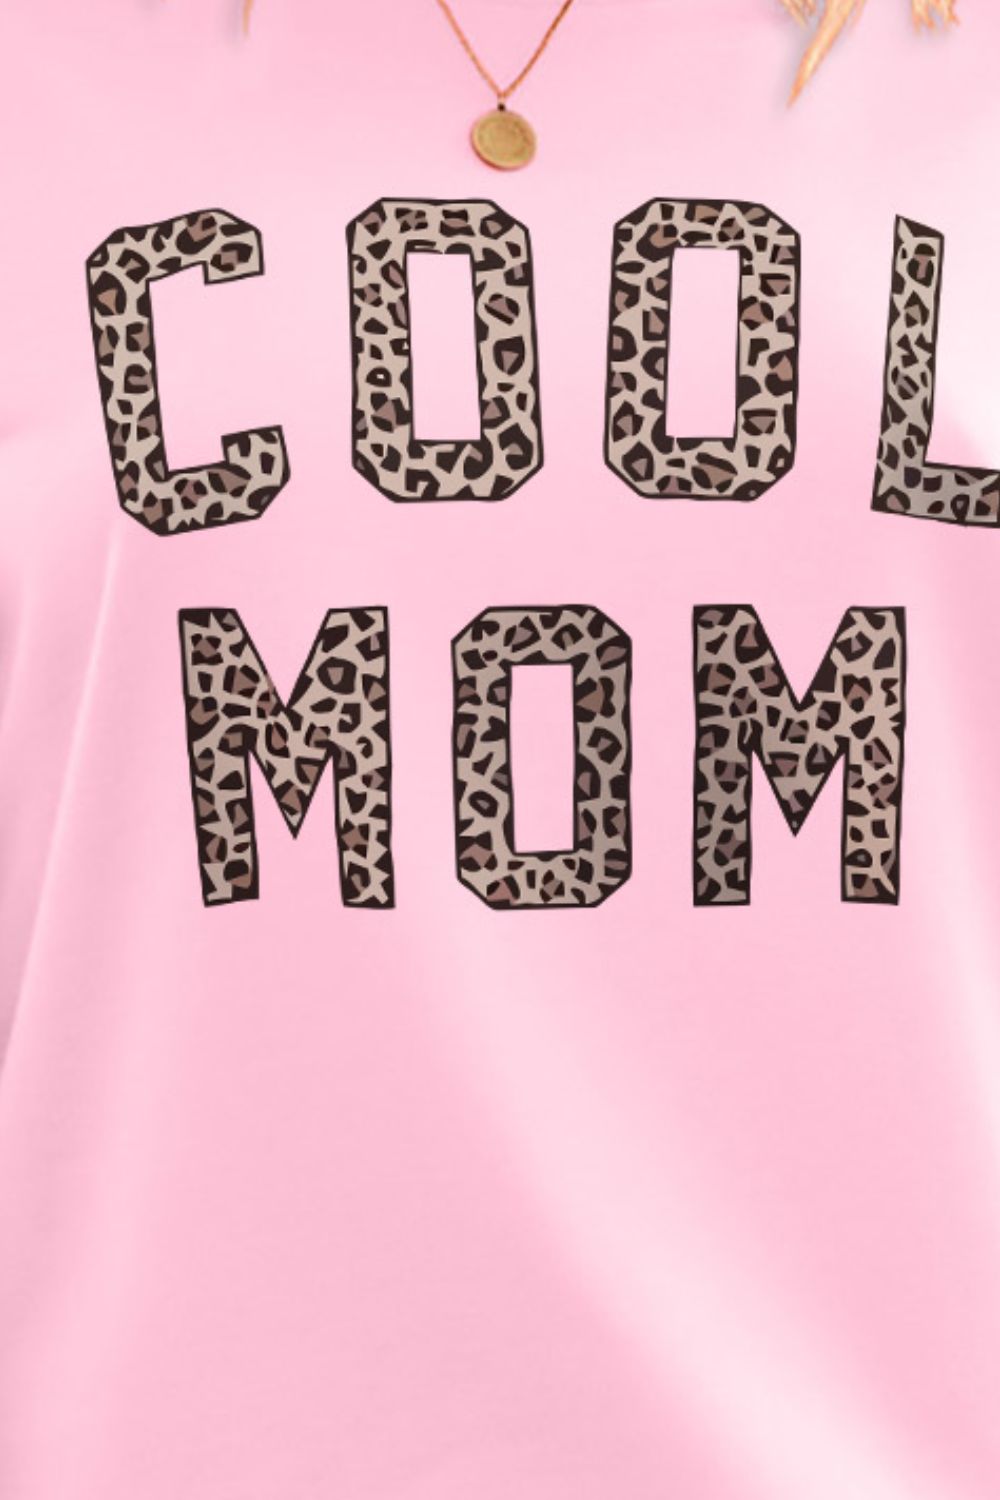 Leopard COOL MOM Graphic Top Pullover Long Sleeve Sweatshirt Pink (Plus Size Available)